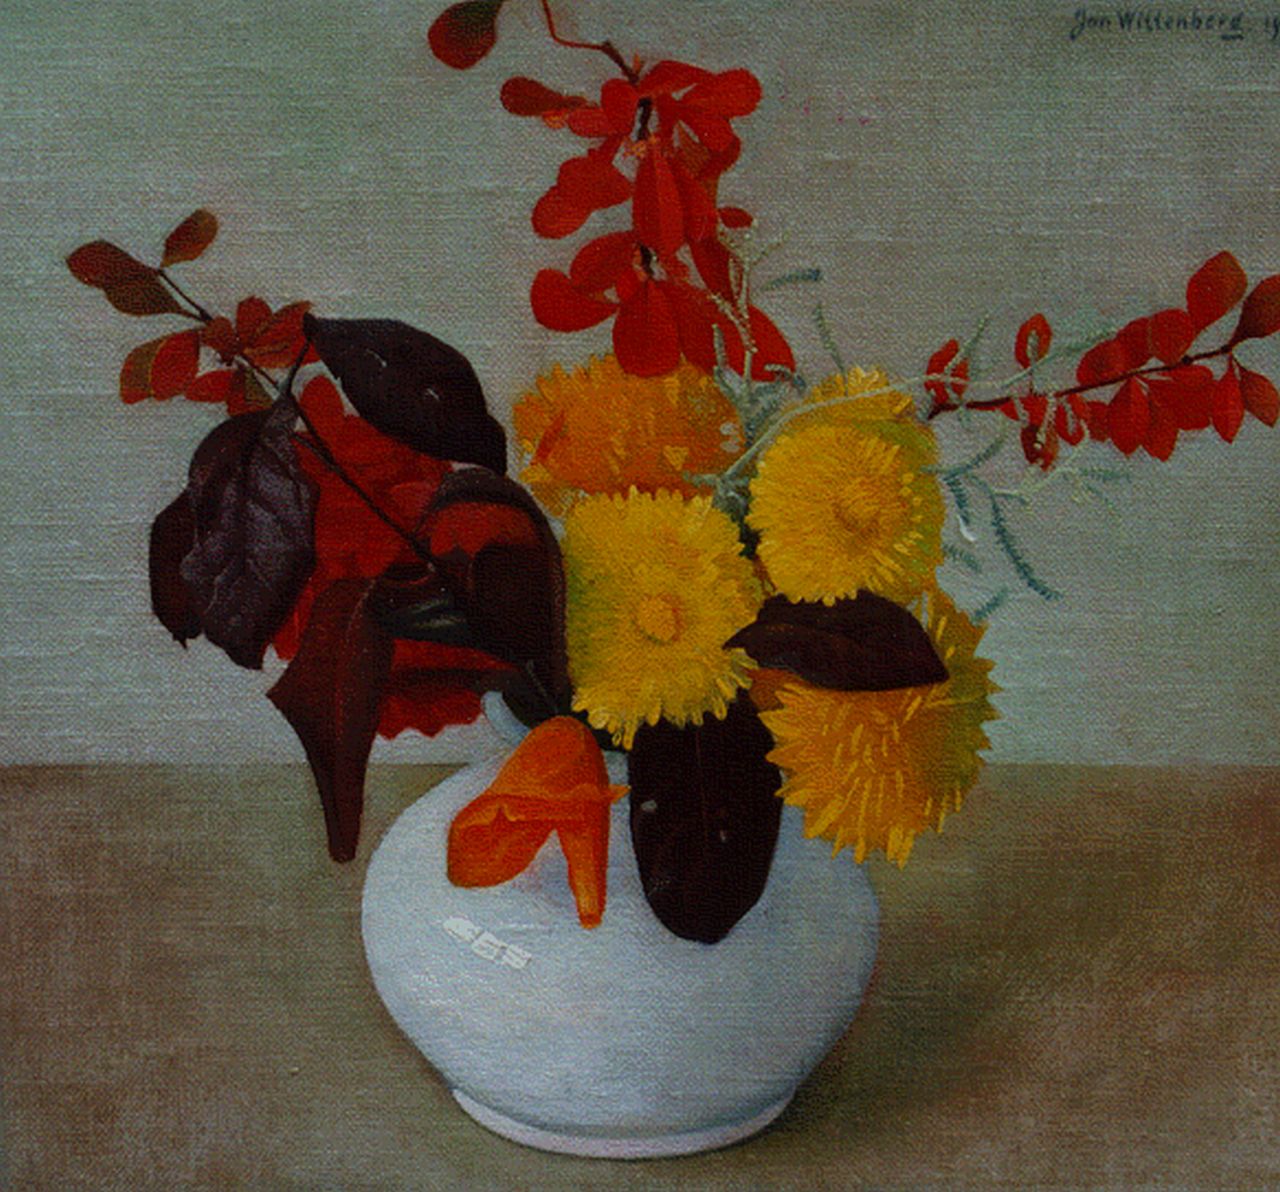 Wittenberg J.H.W.  | 'Jan' Hendrik Willem Wittenberg, A colourful bouquet, oil on canvas laid down on panel 22.5 x 24.5 cm, signed u.r. and dated 1940